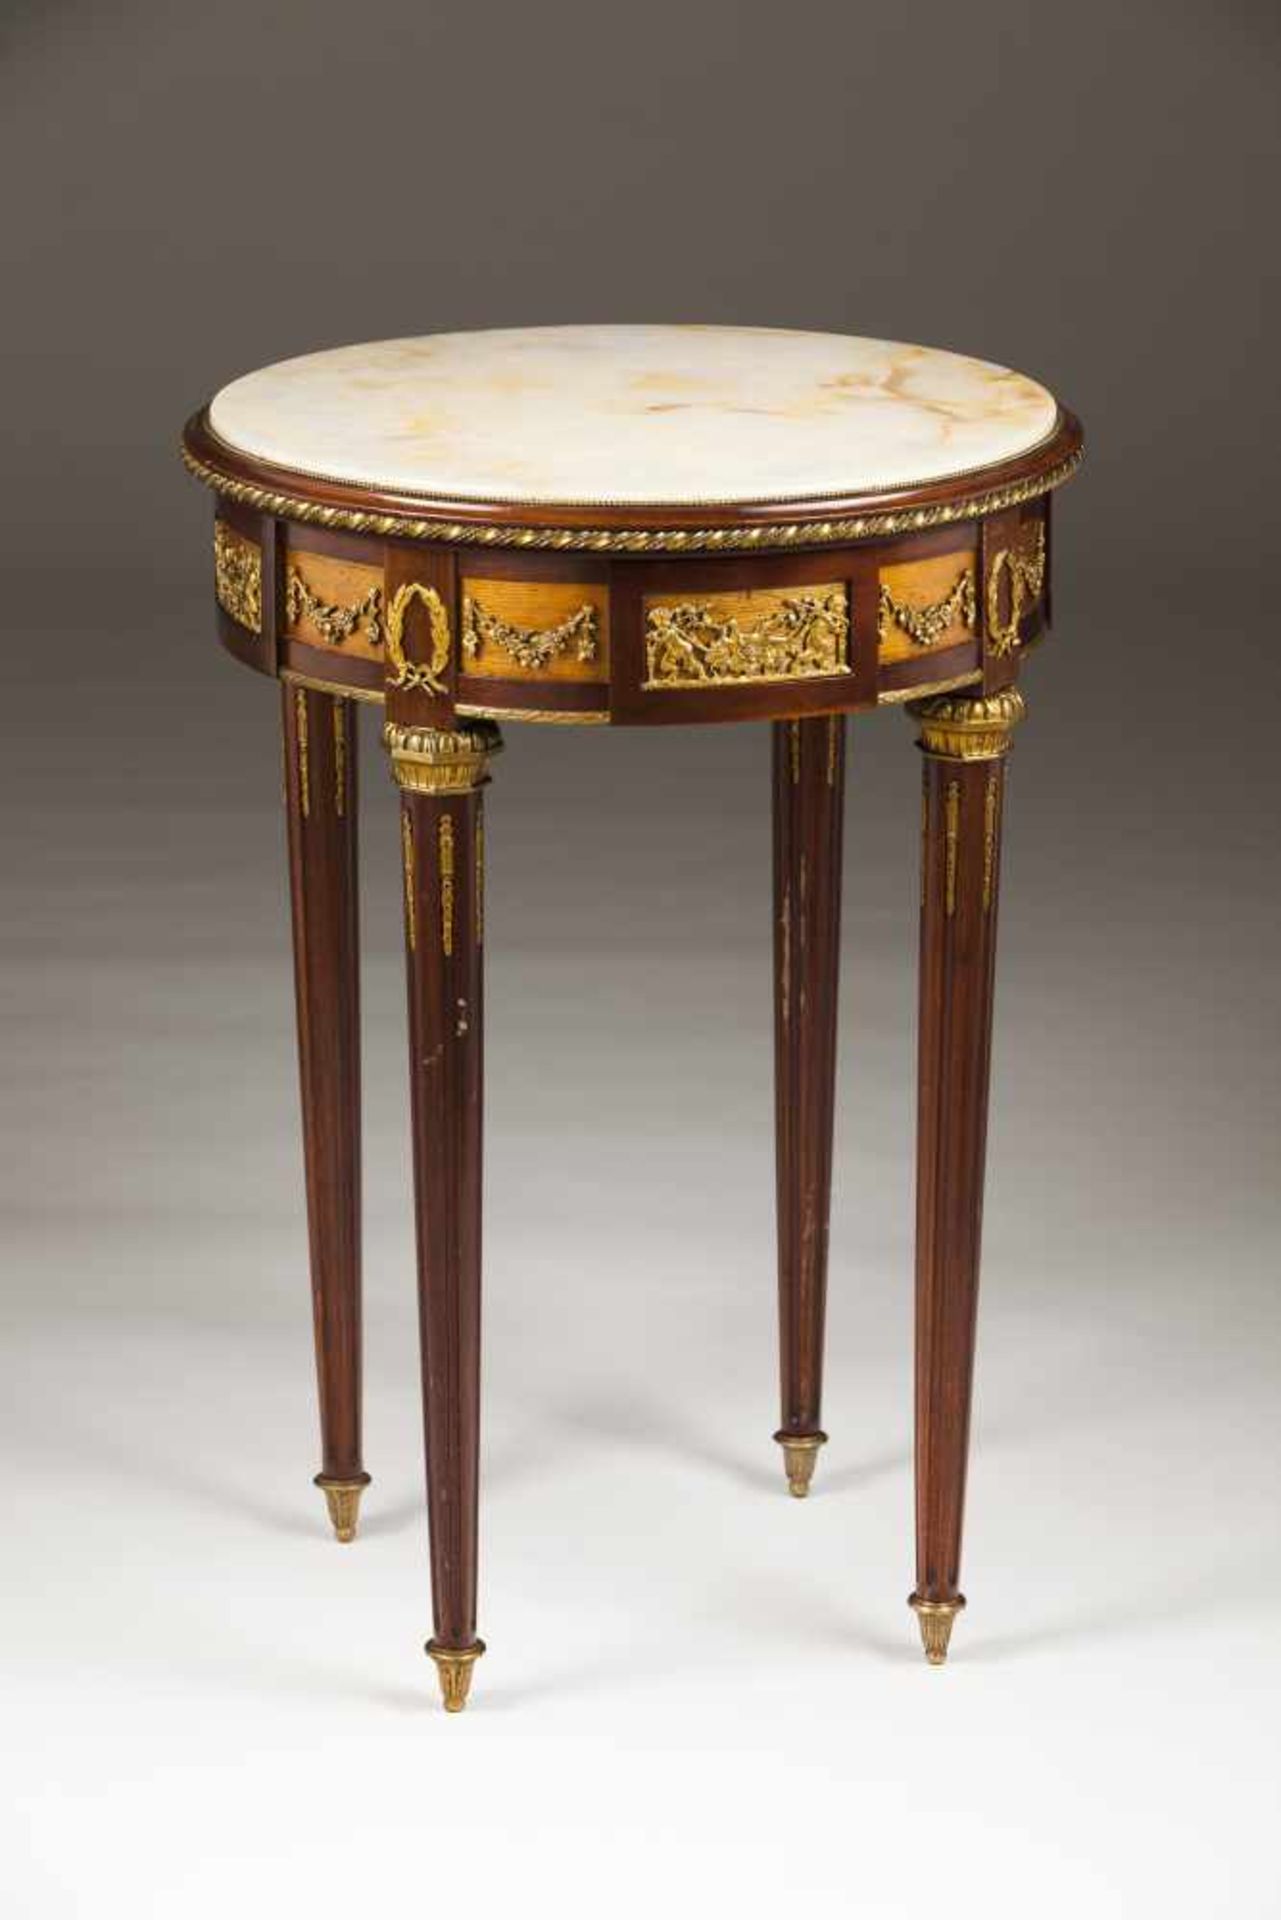 A Louis XVI style occasional table